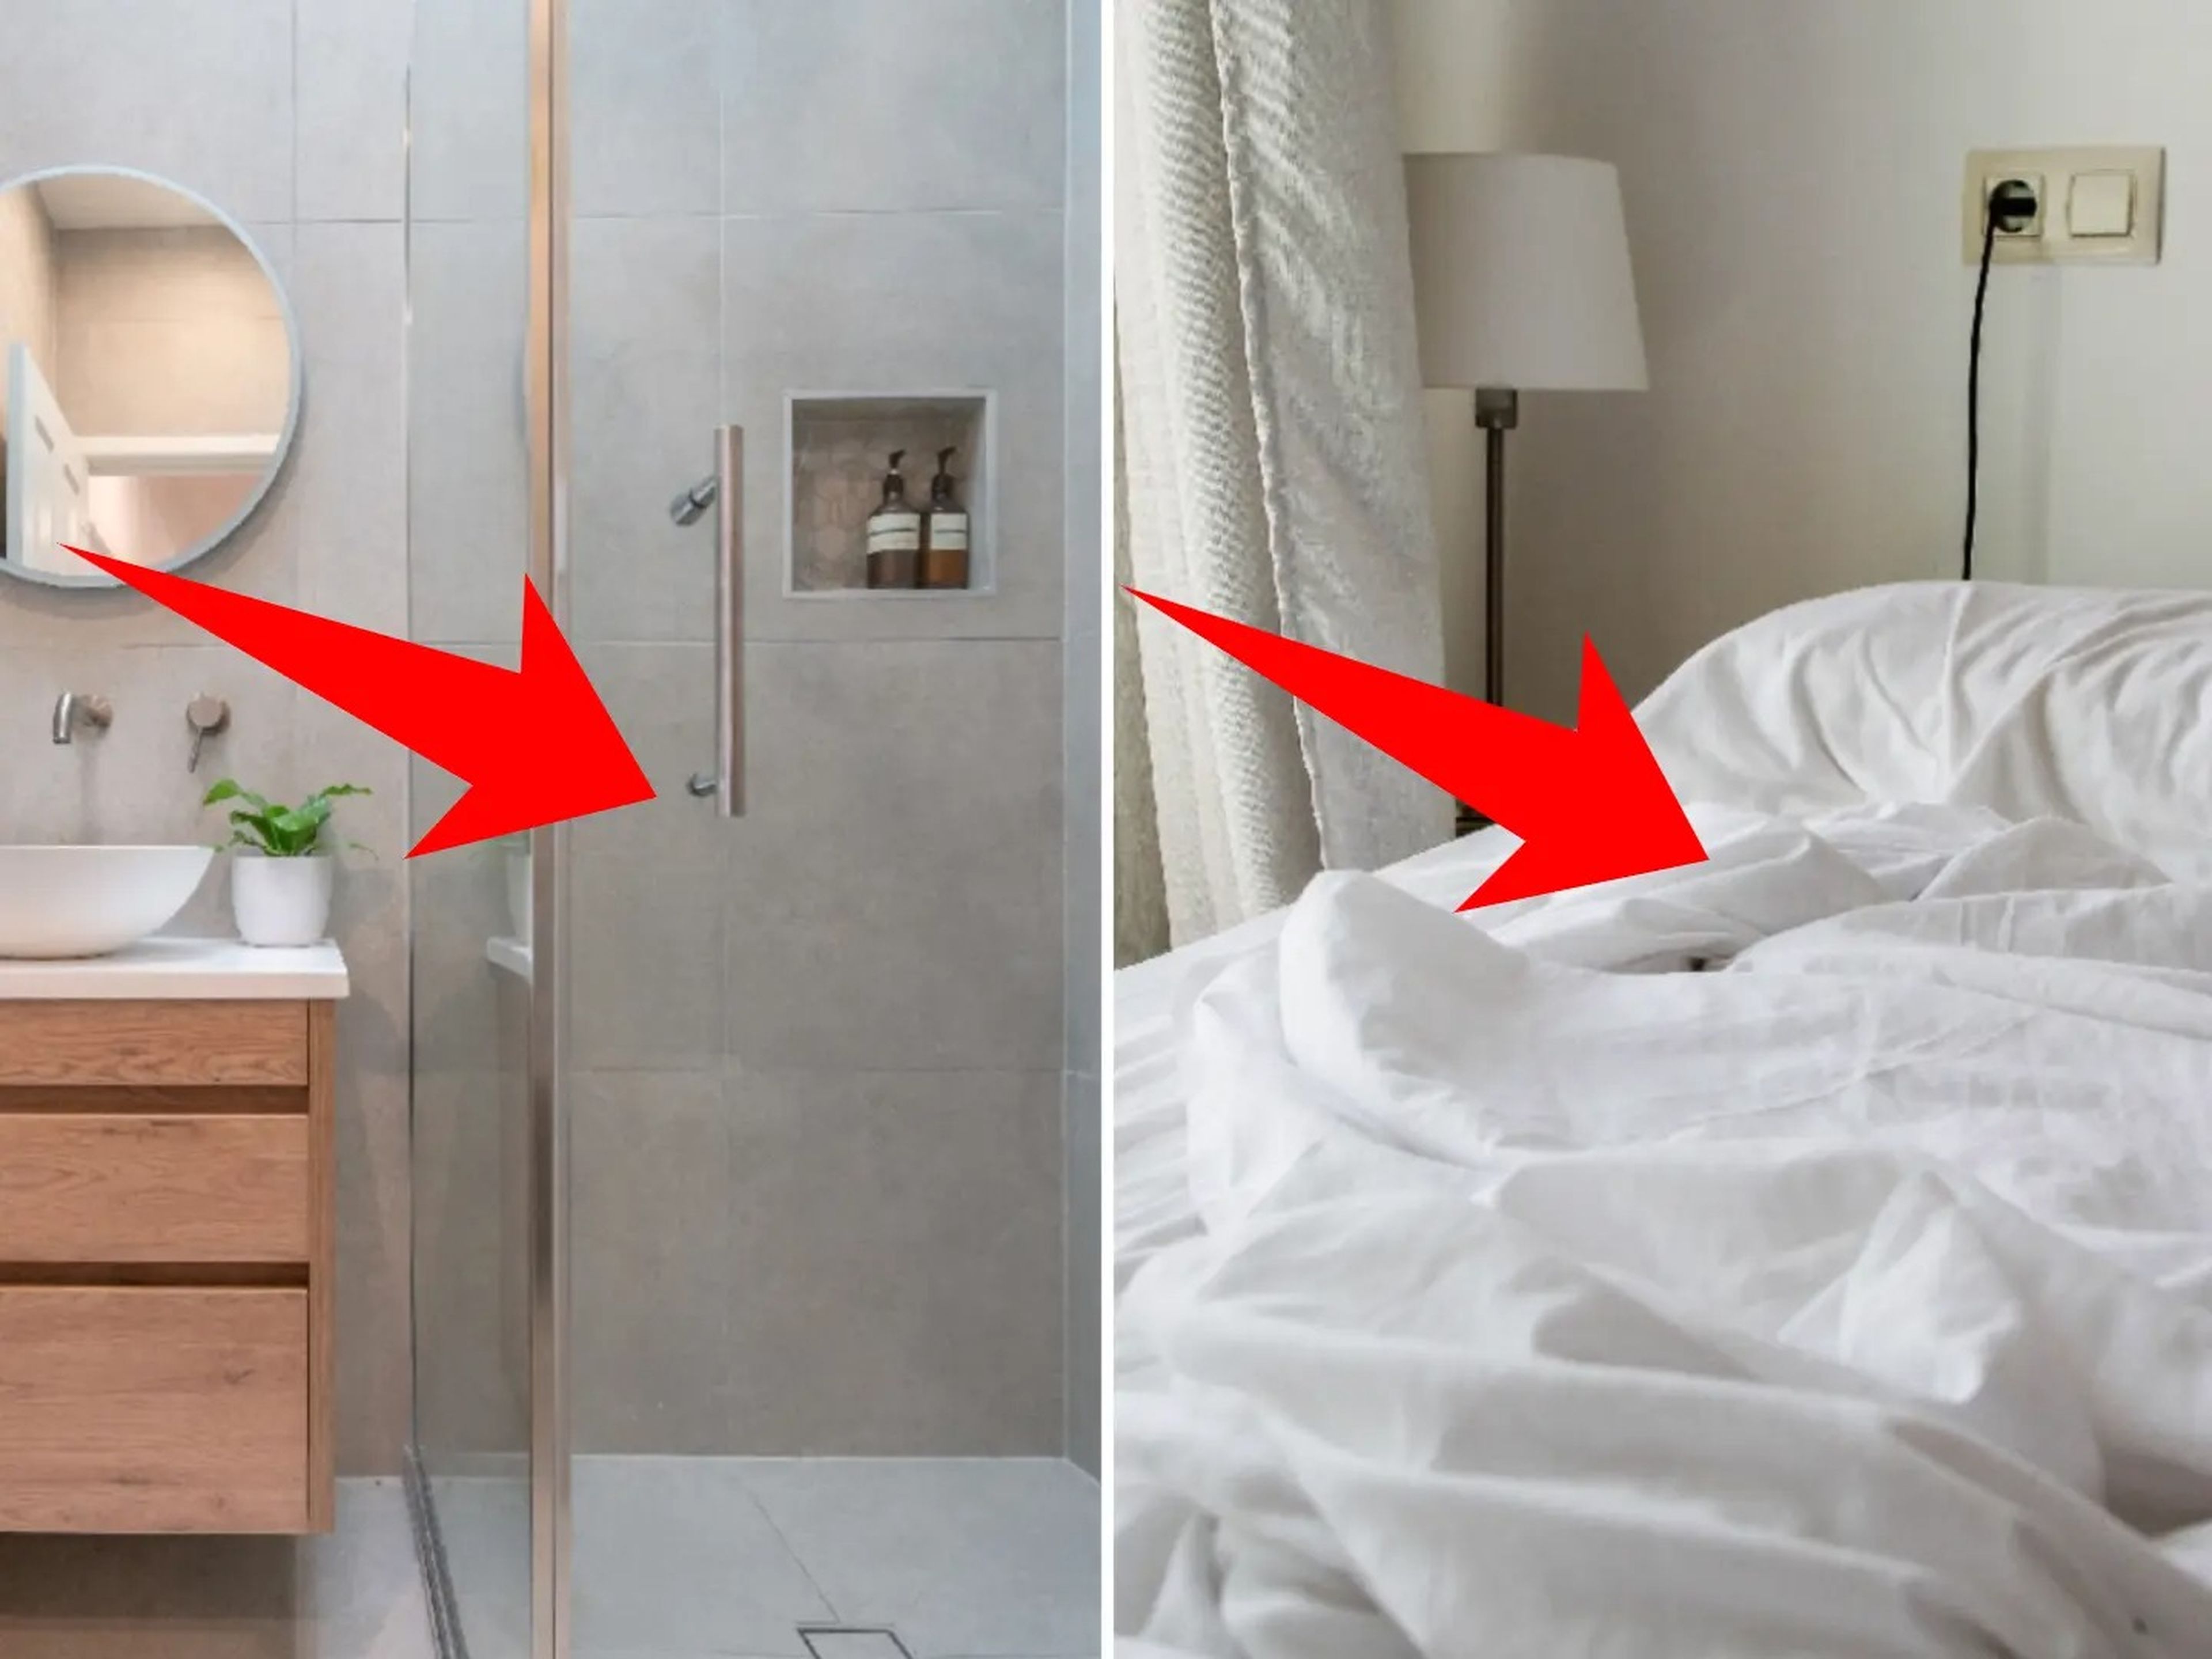 Arrows pointing to a shower (left) and a bed (right).